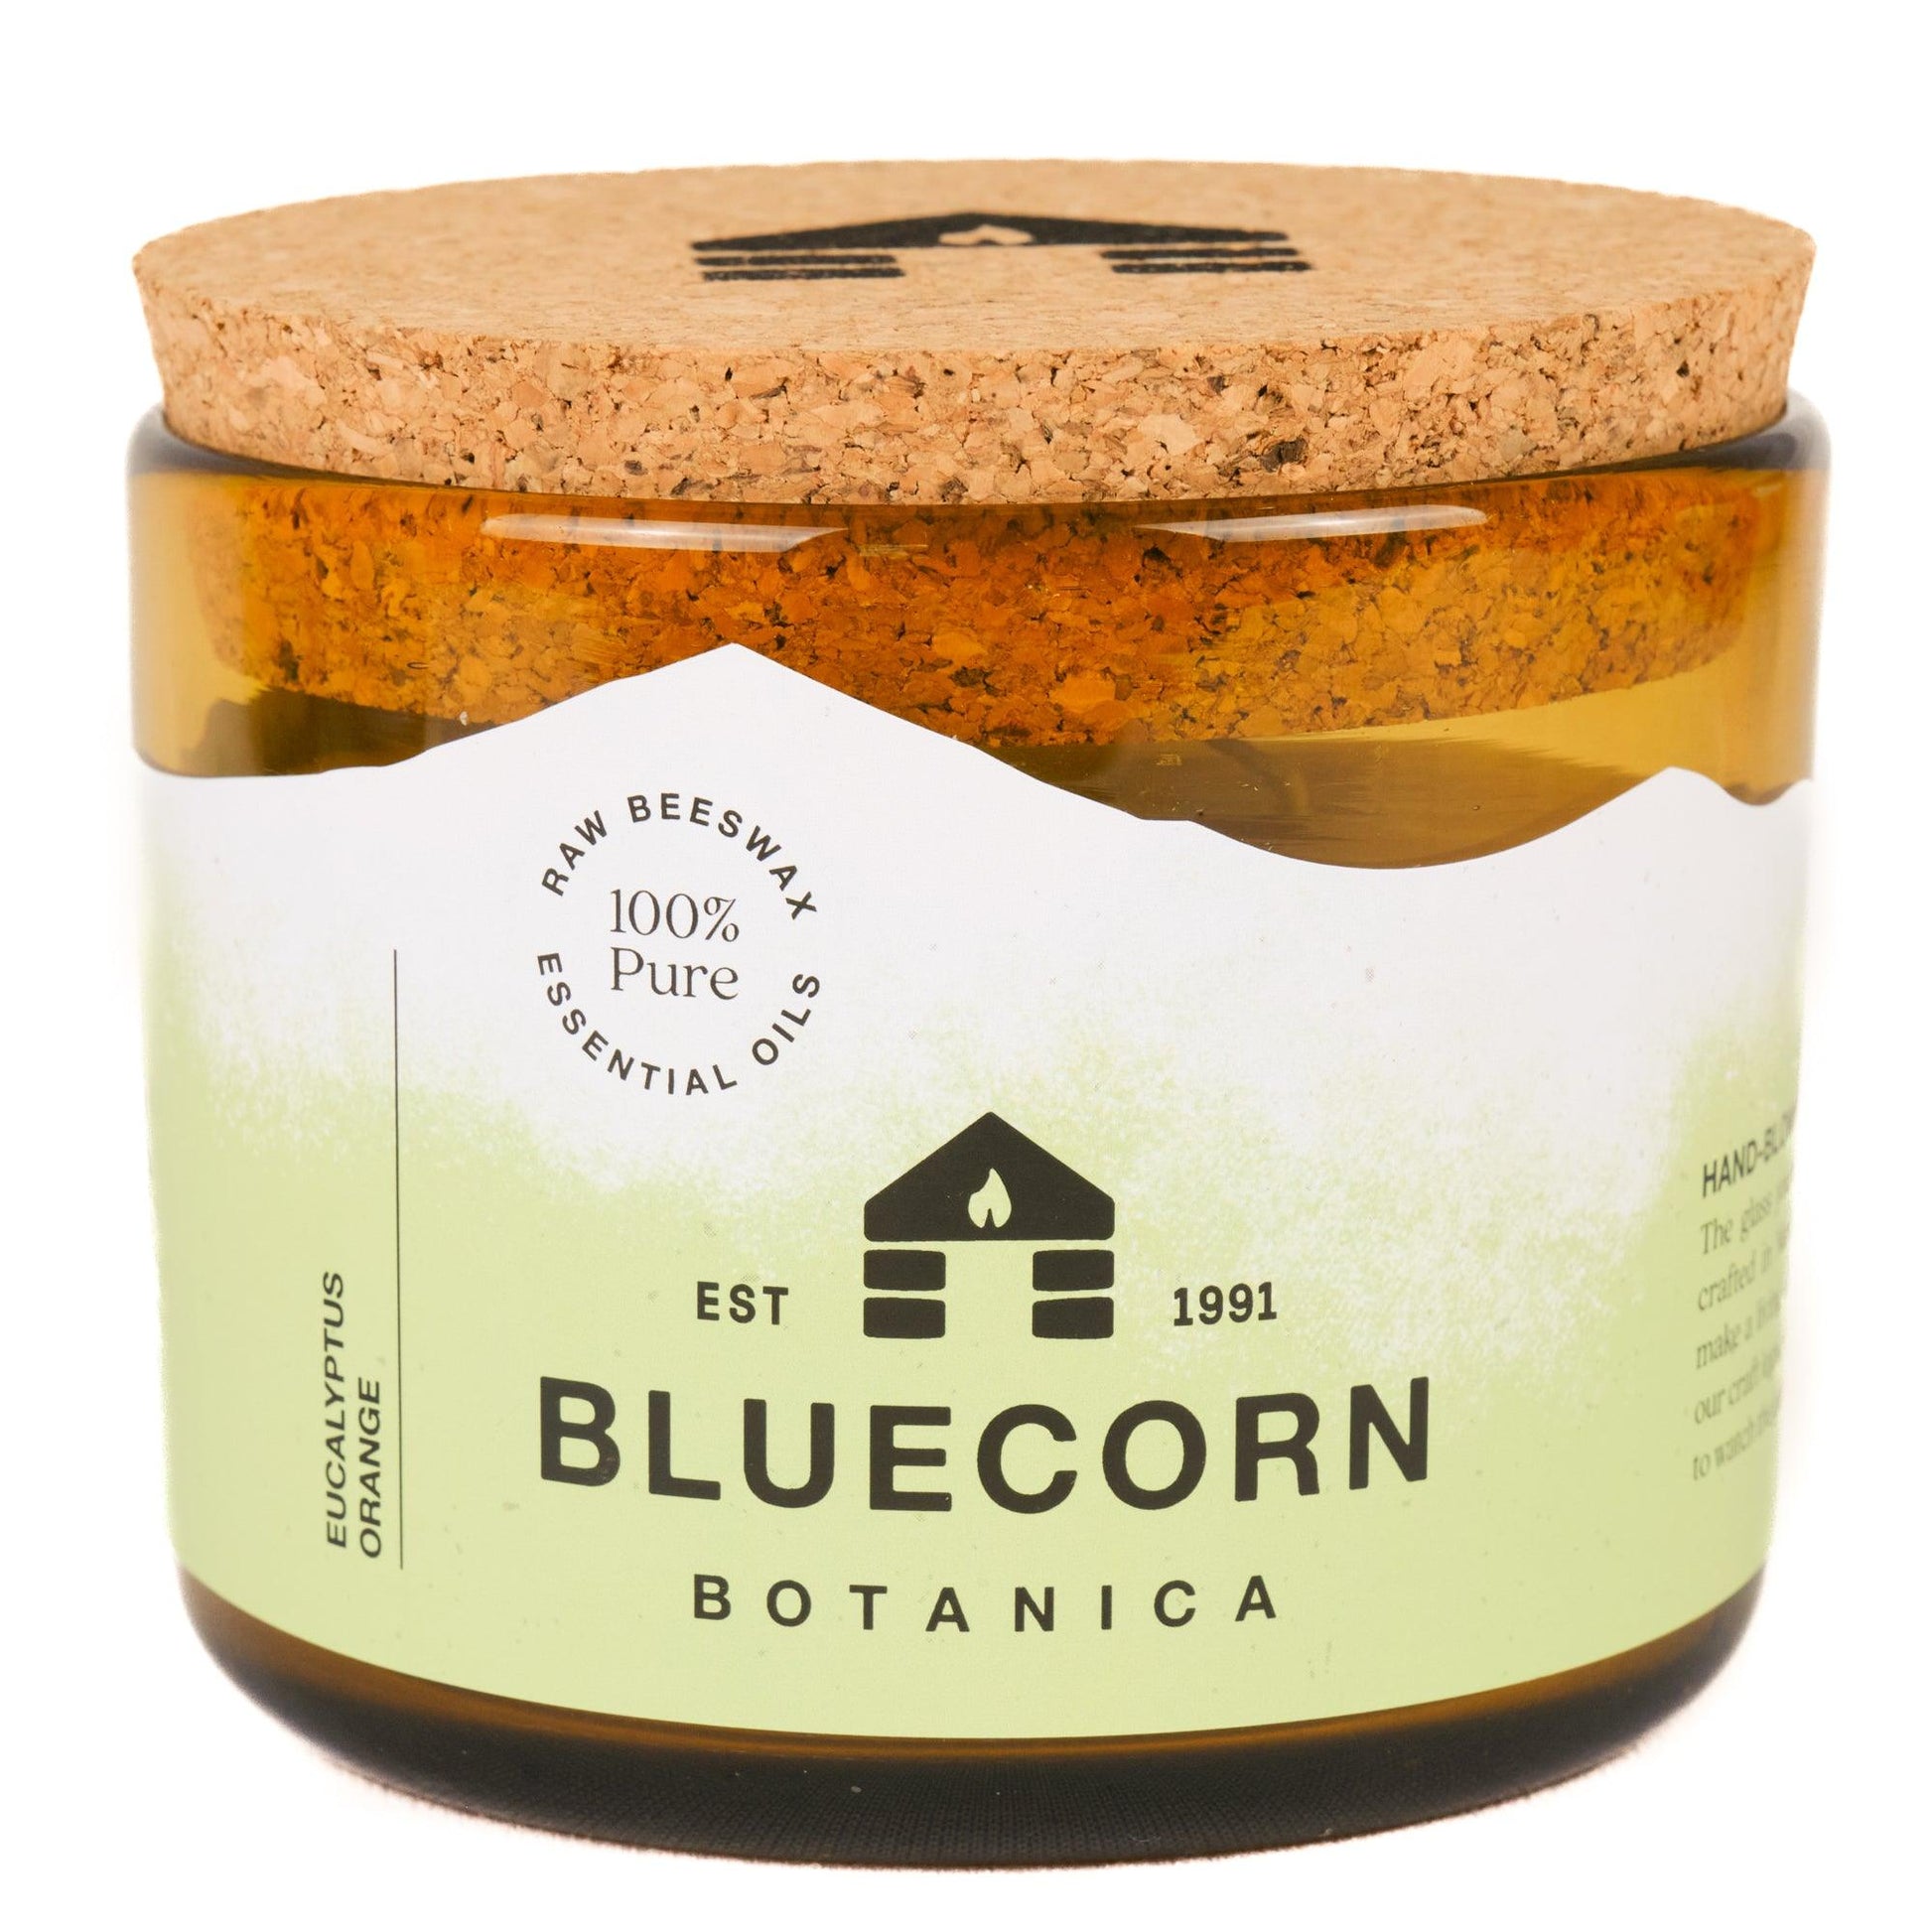 bluecorn candles 3-wick beeswax botanica scented candle with essential oils of eucalyptus and orange